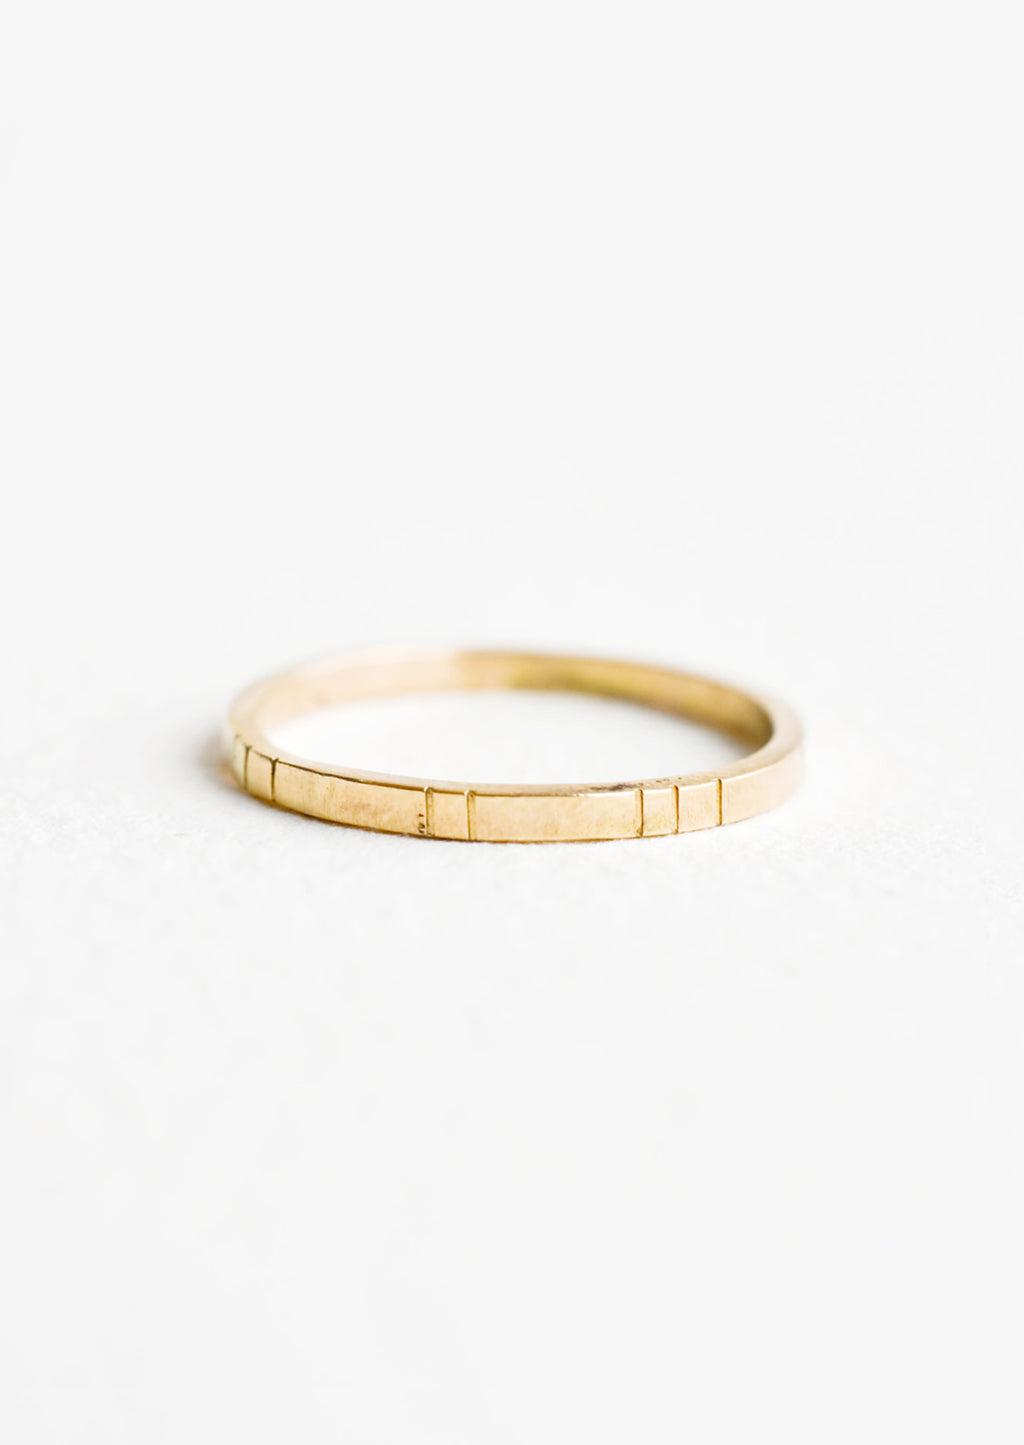 1: Yellow gold ring, medium weight band with etched decorative lines.